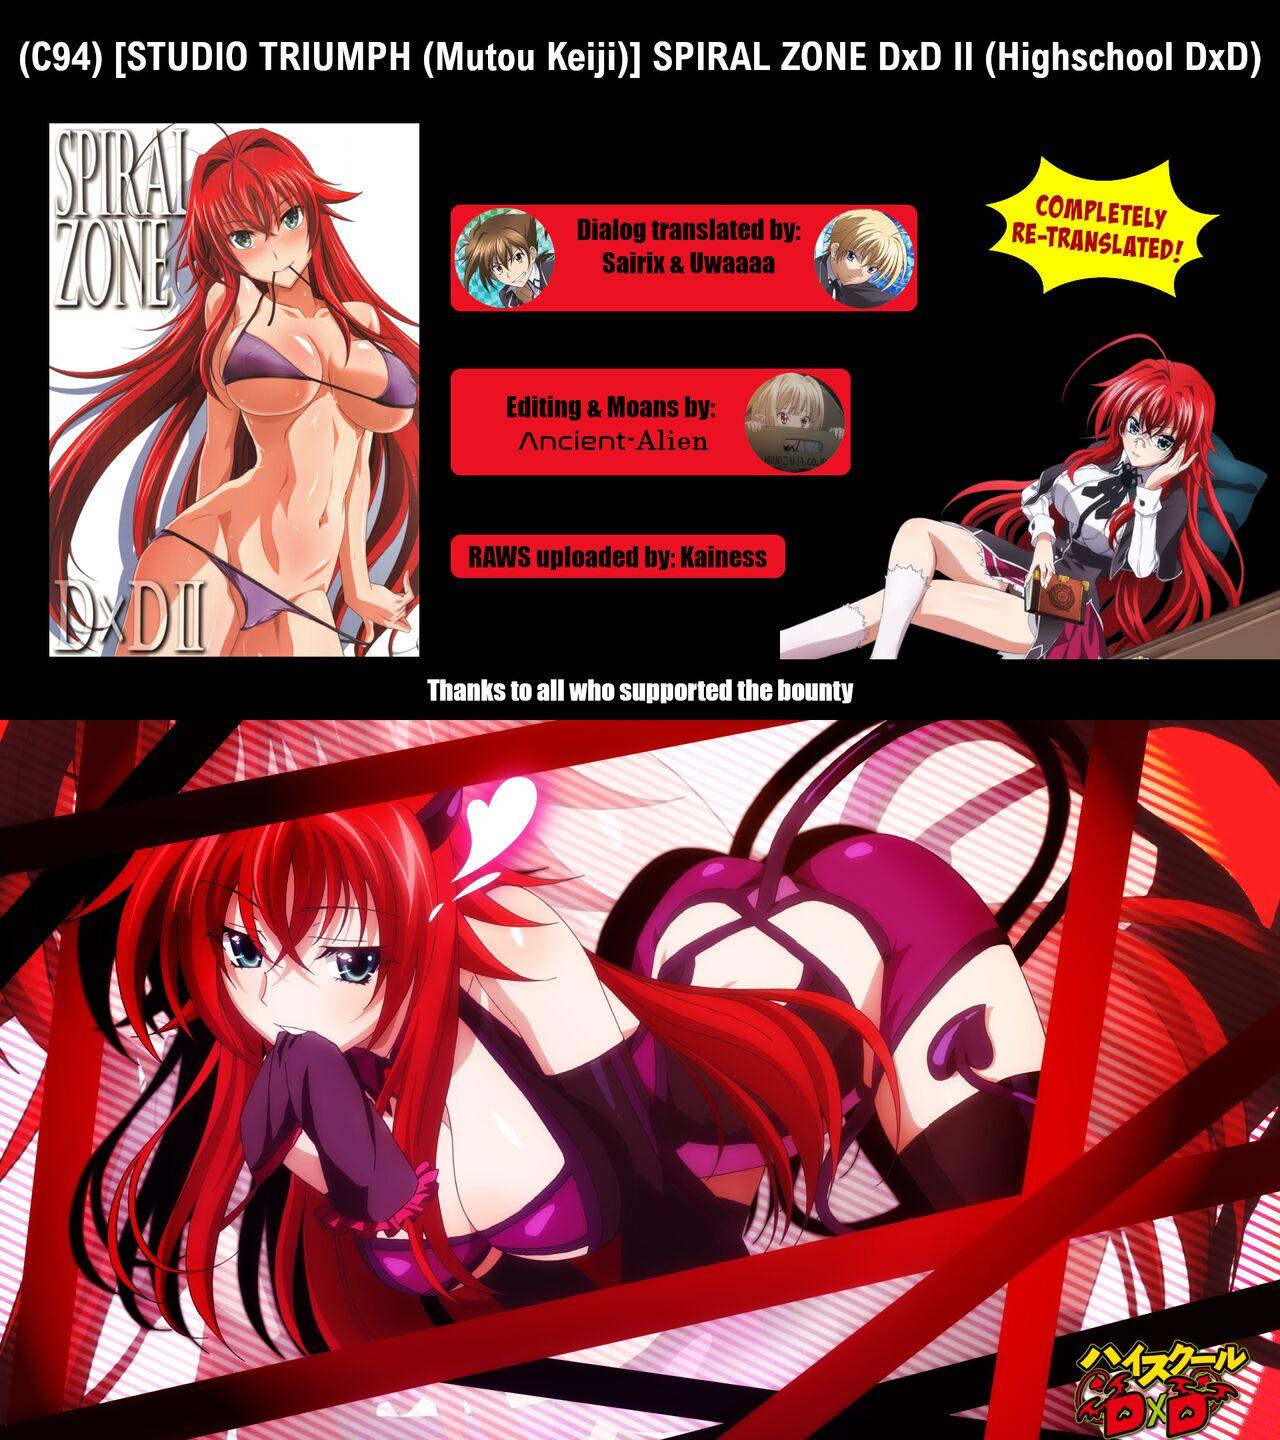 1080p SPIRAL ZONE DxD II - Highschool dxd Passionate - Page 27